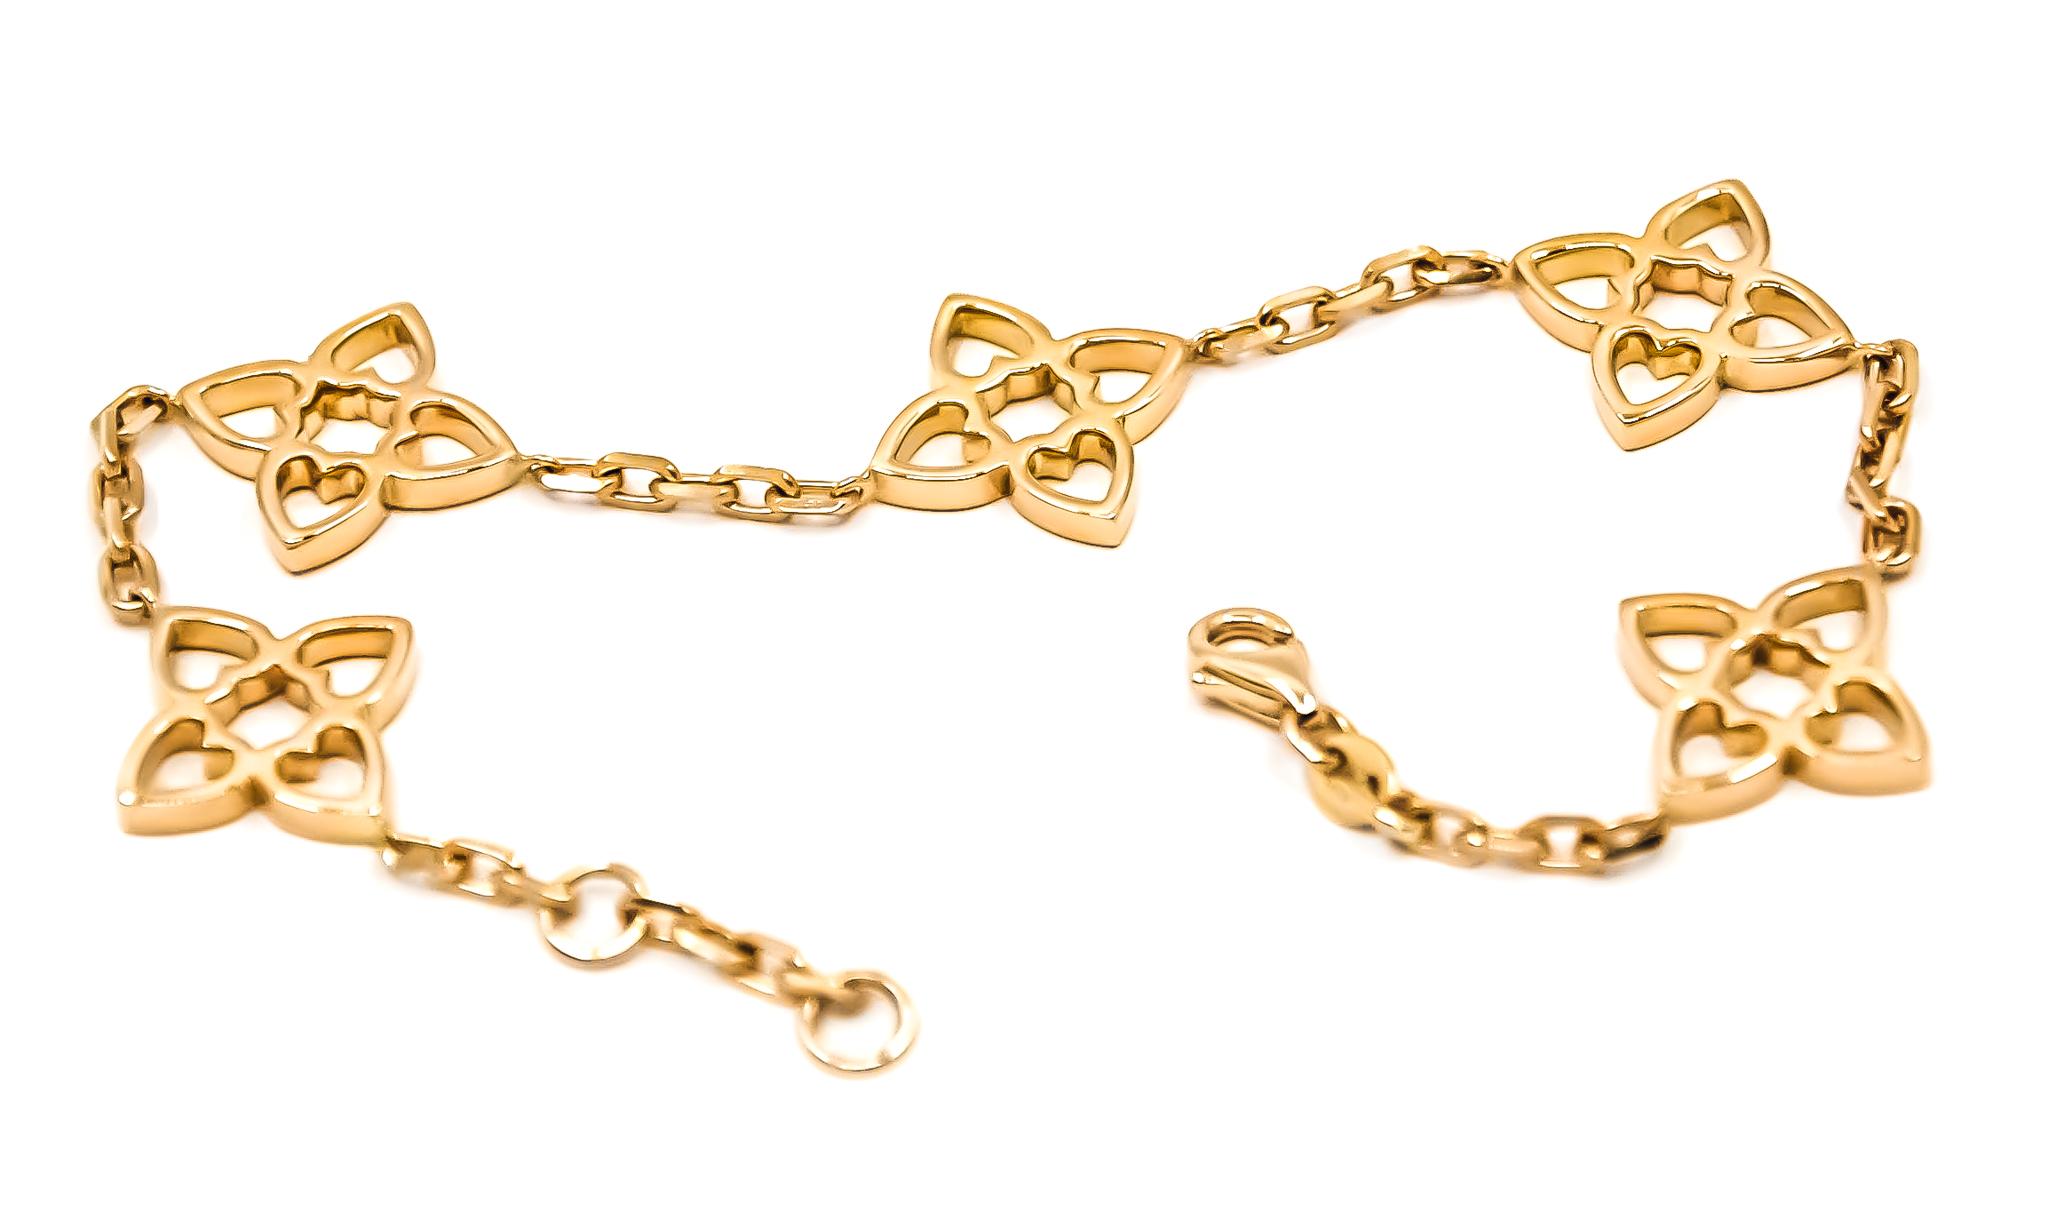 18kt solid yellow gold 5 motif bracelet by Mohamad Kamra from the Connected Hearts Collection.

Bracelet can be made in any wrist size.